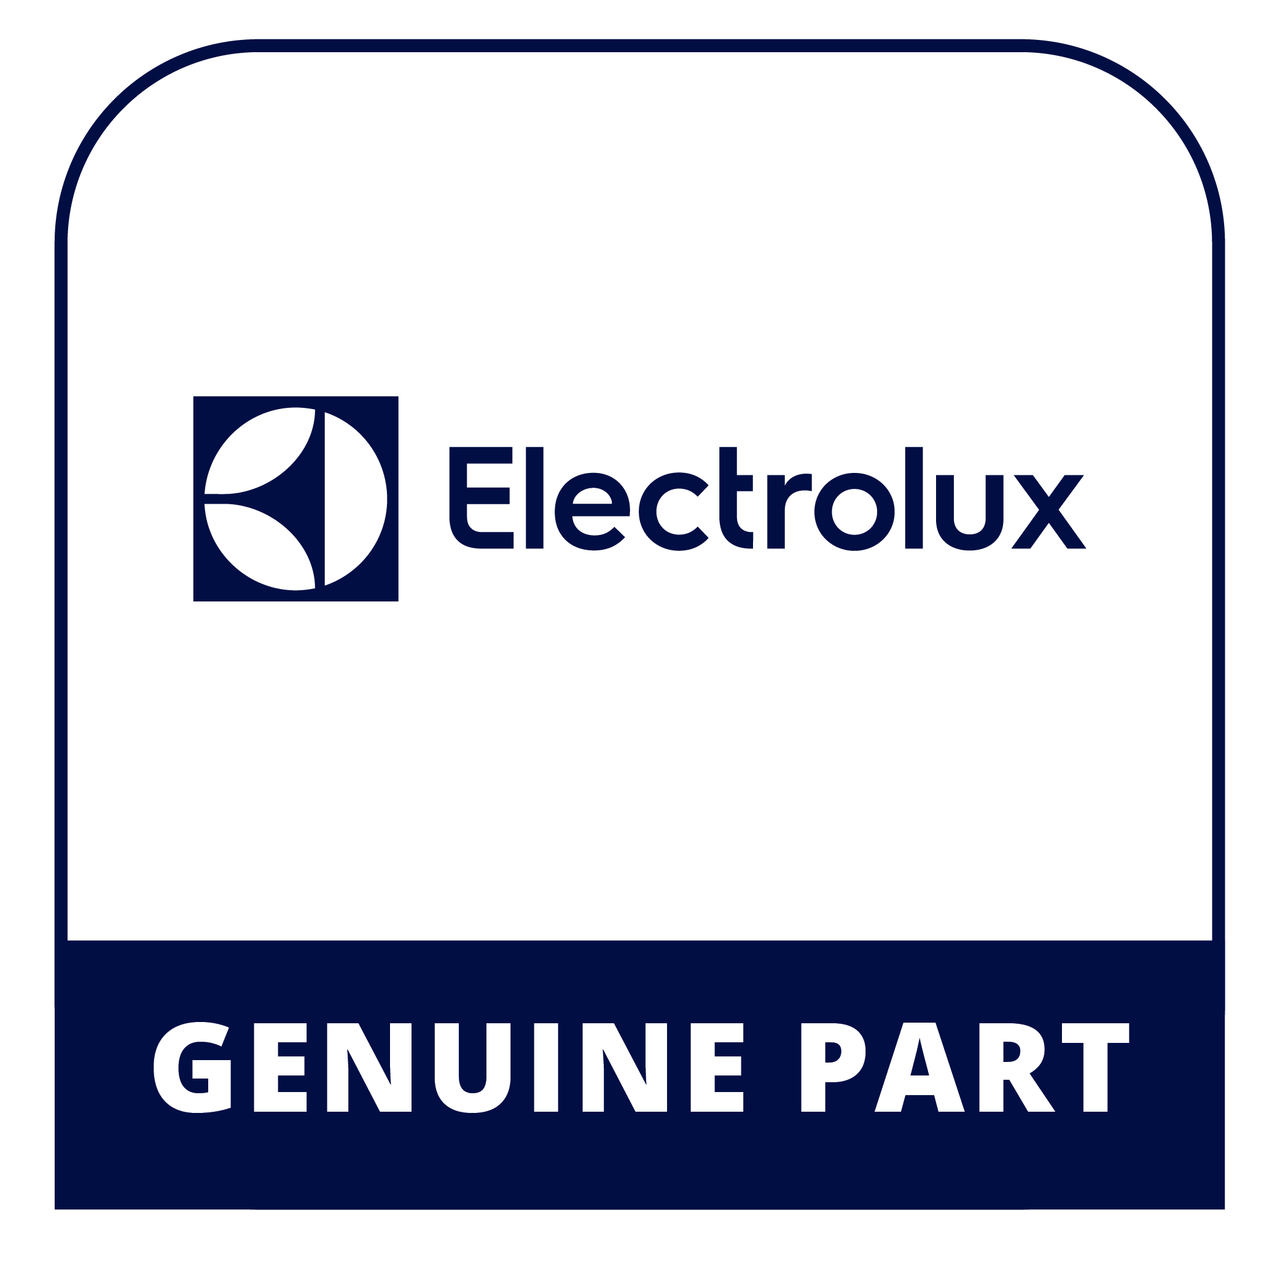 Frigidaire - Electrolux 318205826 Owners Manual - Genuine Electrolux Part